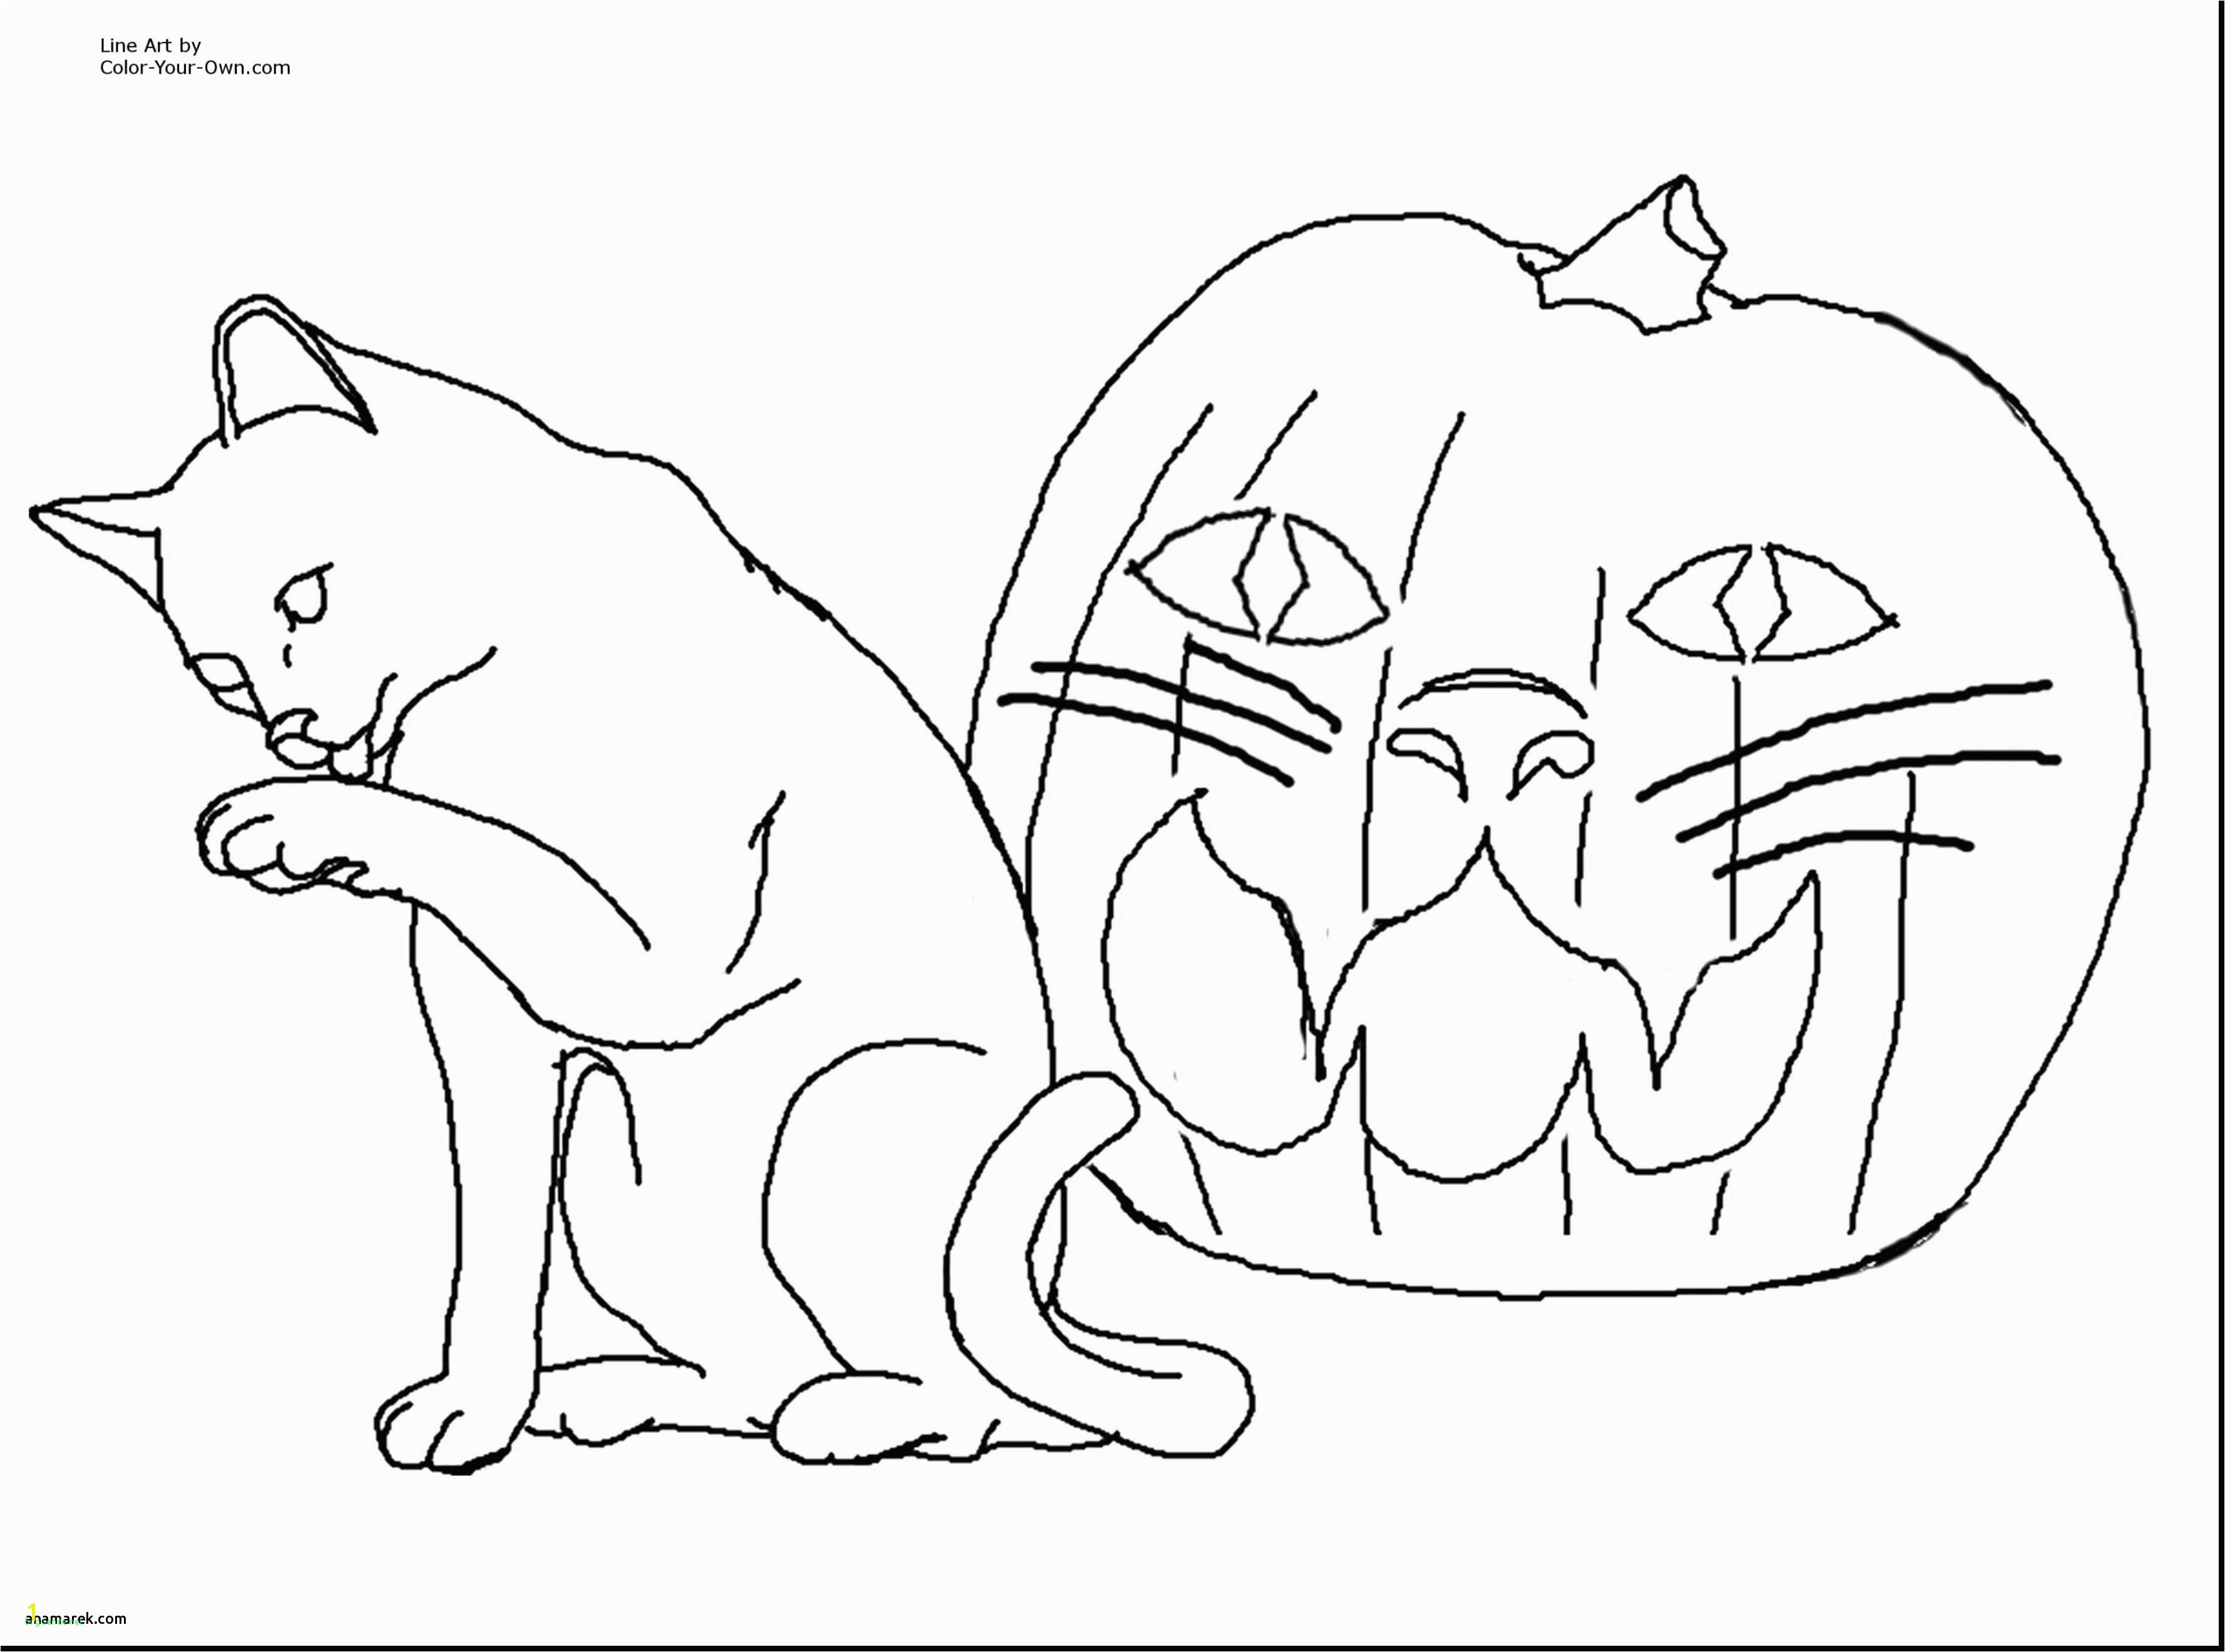 Spooky Cat Coloring Pages Inspirational Kids Coloring Pages for Girls Halloween Cats In